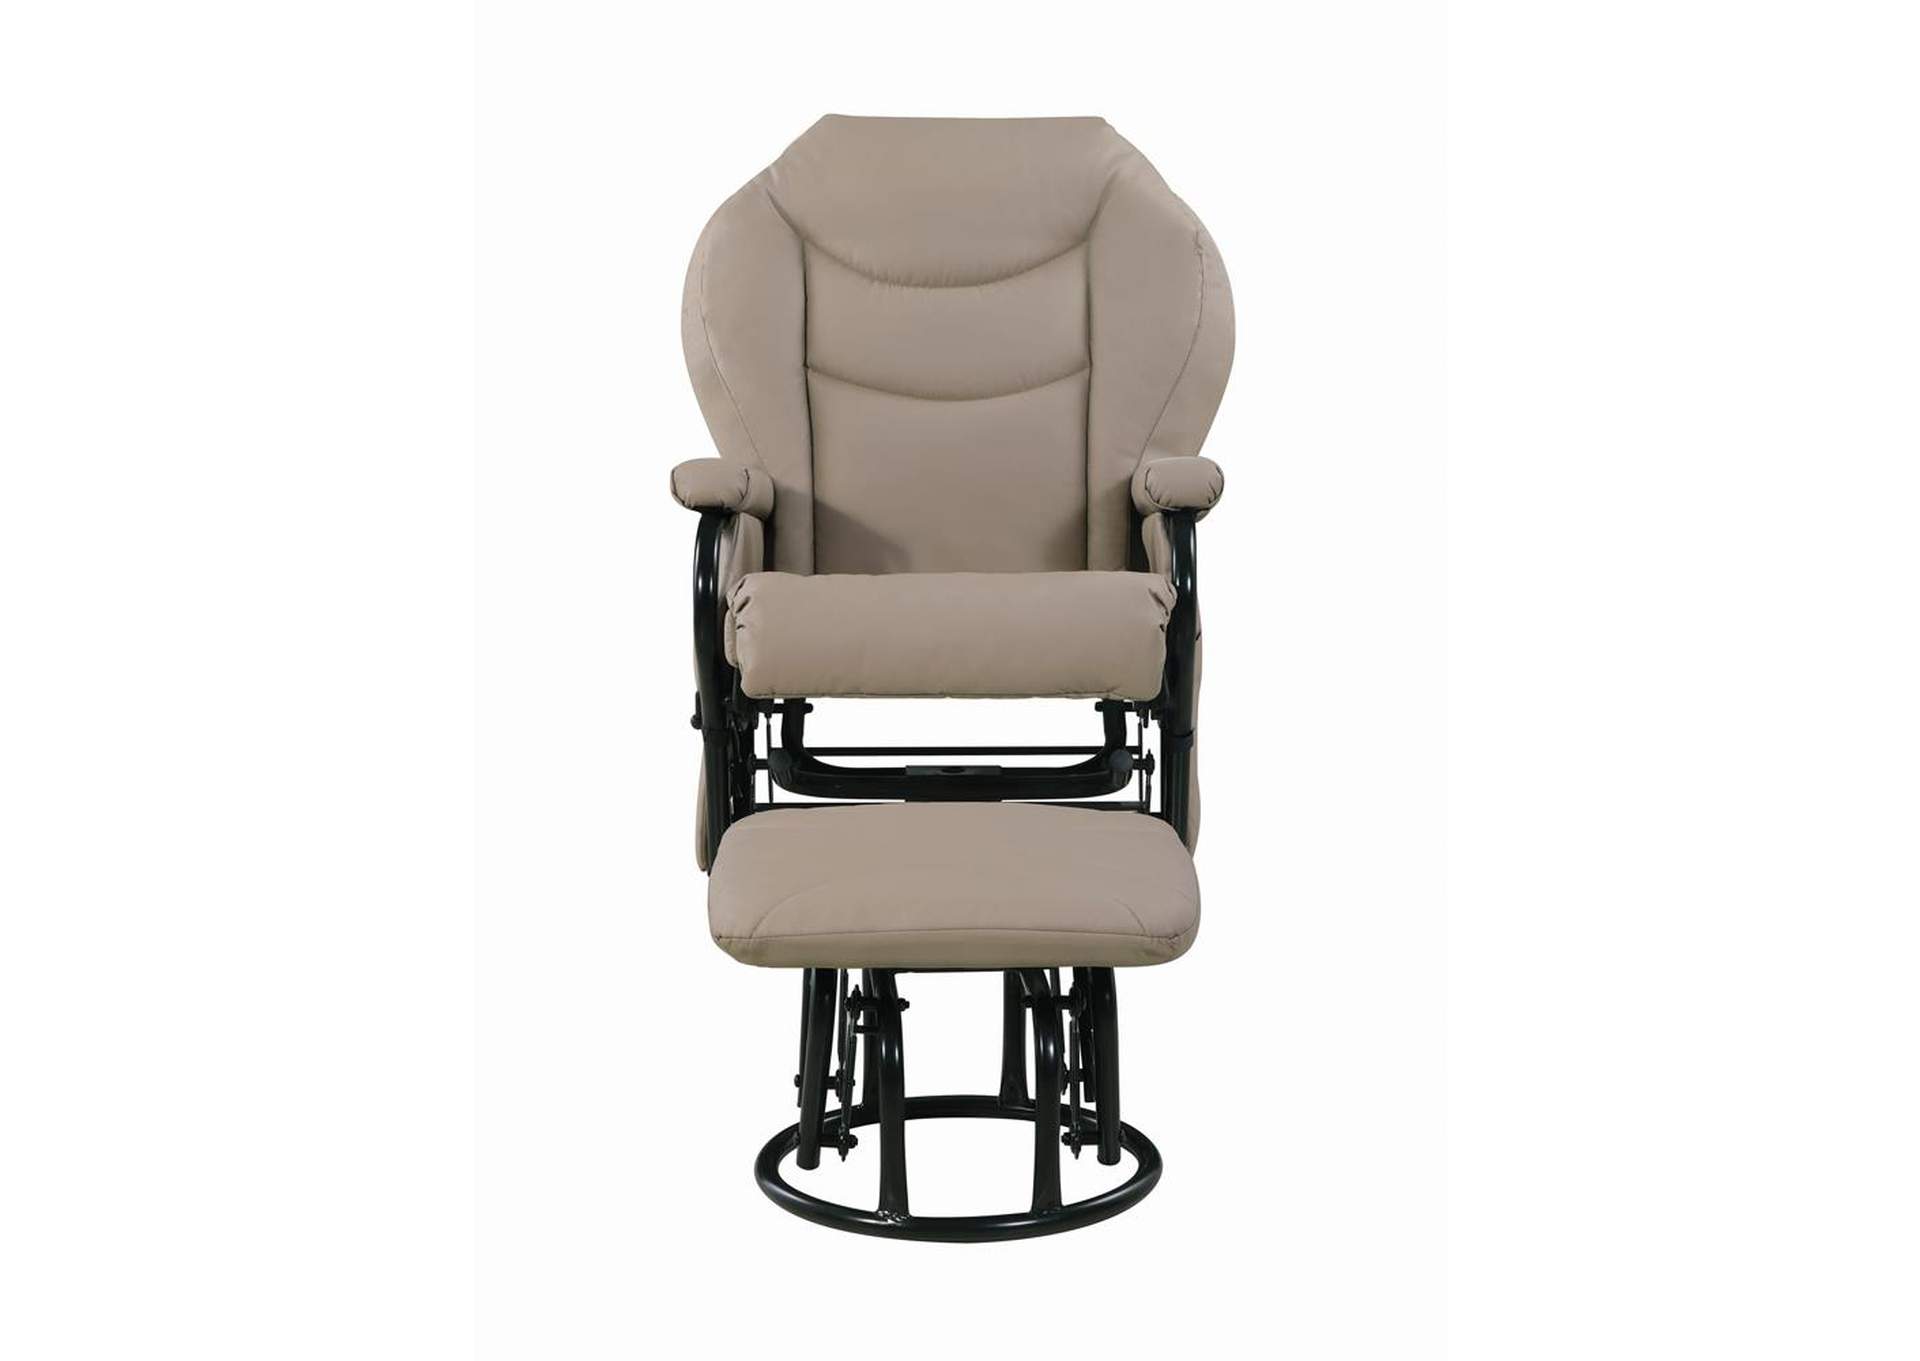 Upholstered Glider Recliner with Ottoman Beige and Black,Coaster Furniture